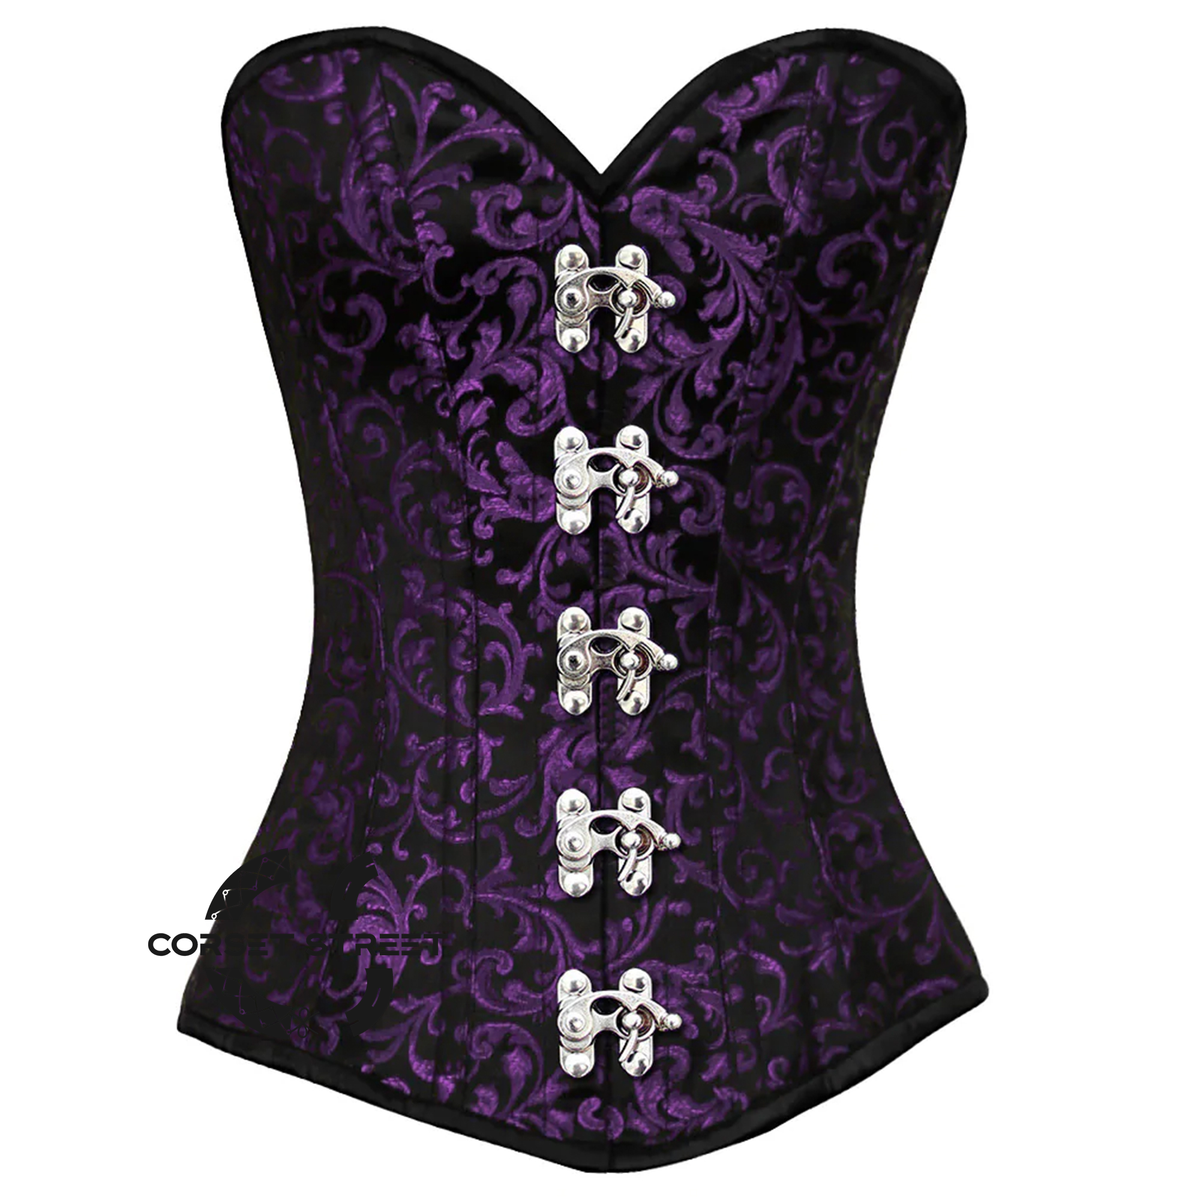 Purple And Black Brocade Front Clasps Gothic Corset Burlesque Overbust Top